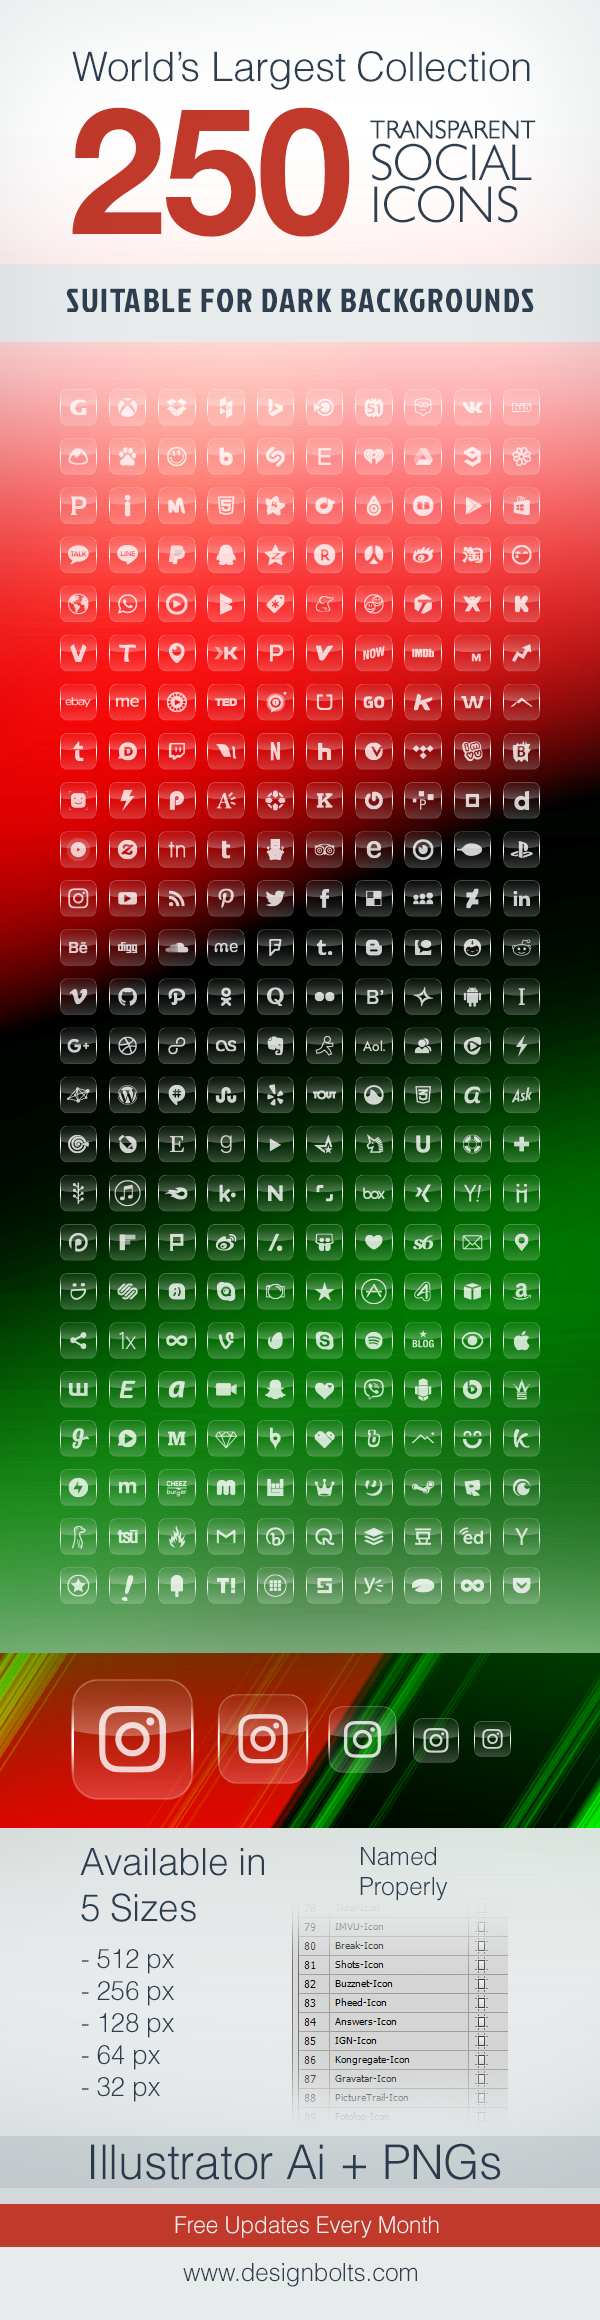 250 Free Premium Transparent Social Media Icons For Dark Website Backgrounds - robloxrss at robloxrss twitter